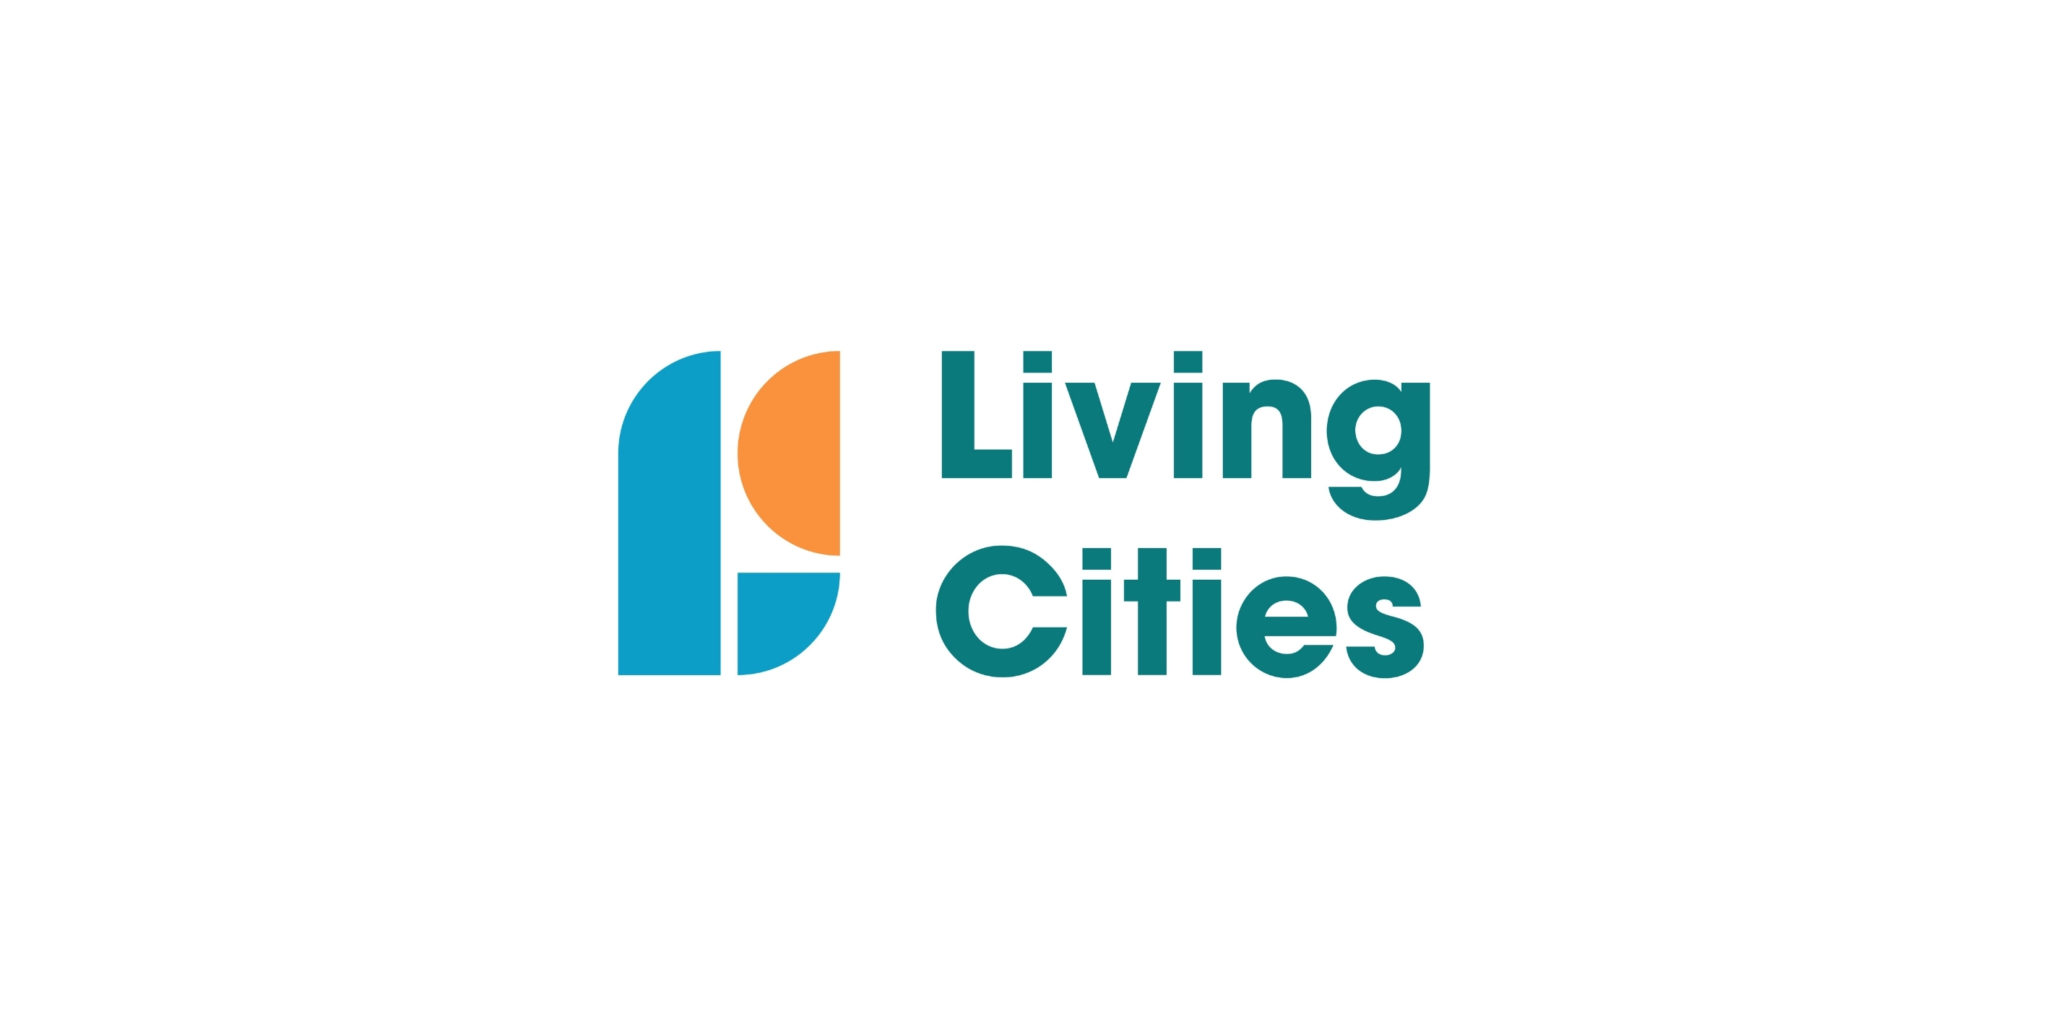 Living Cities announces capital investment in Mission Driven Finance to increase access to growth capital and support for social impact small businesses and nonprofits